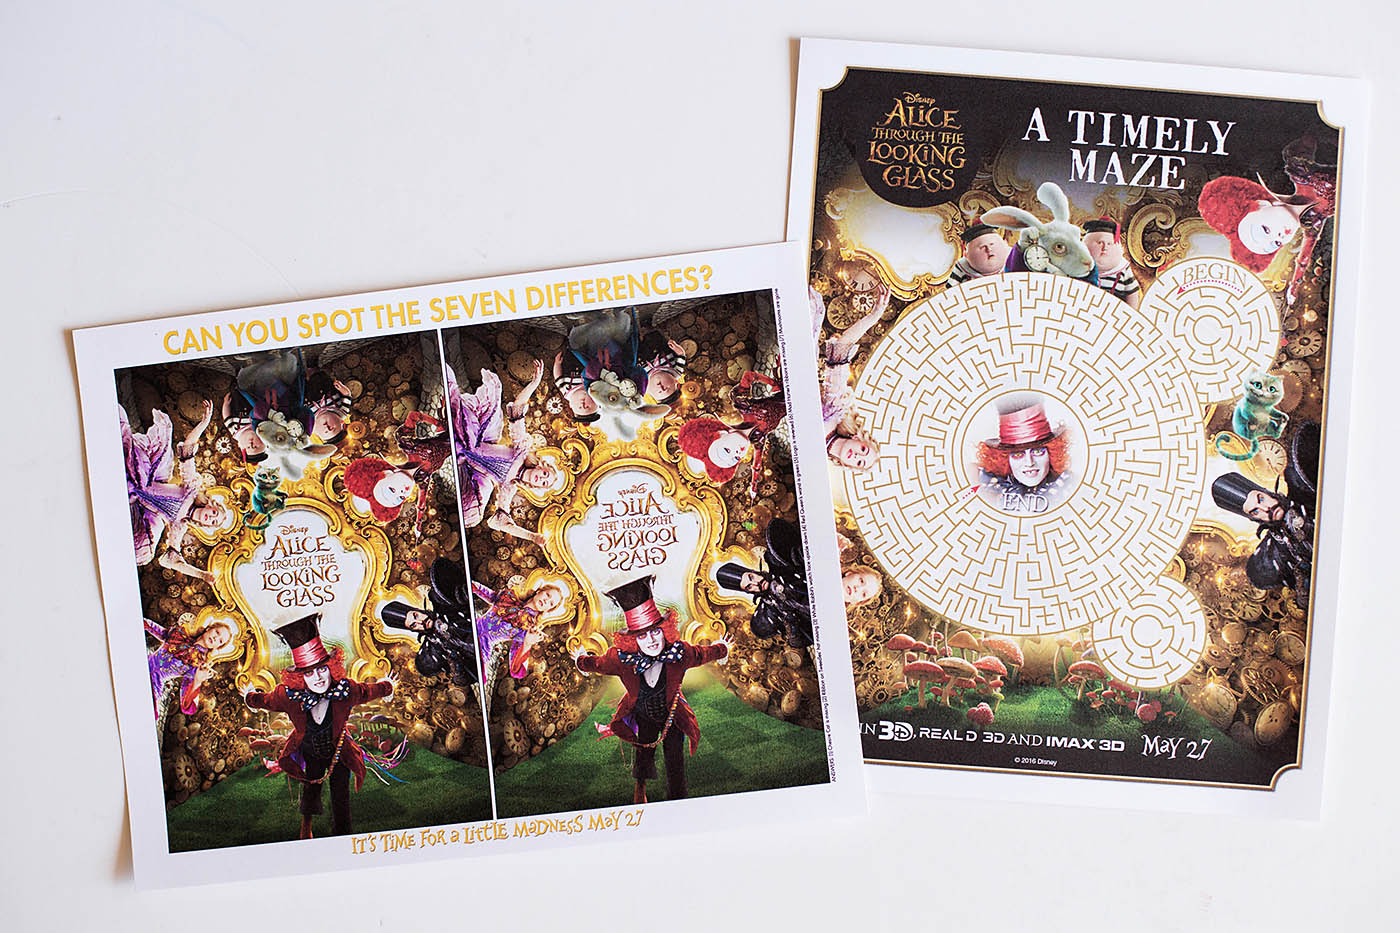 Disney's Alice Through the Looking Glass printable activities including a maze, find the difference, coloring pages, a giant floor puzzle and bookmarks!